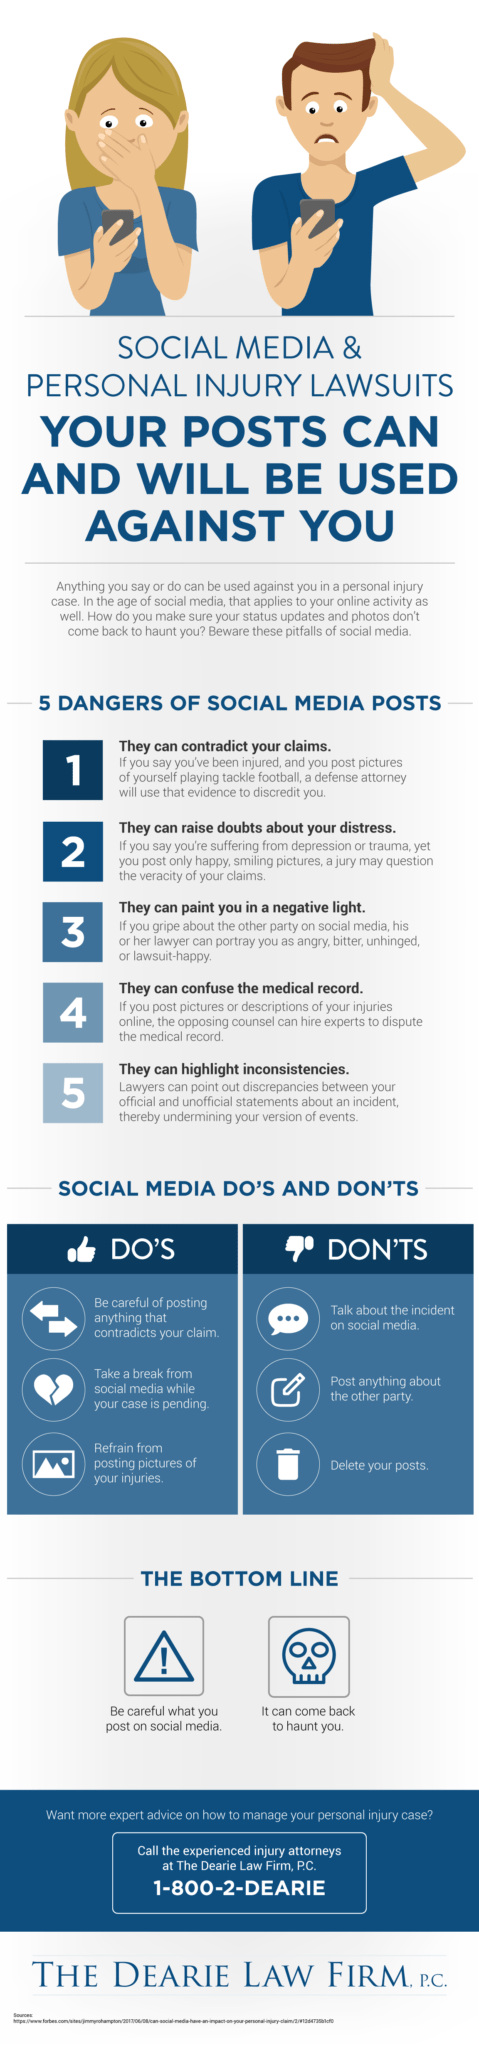 Social Media & Personal Injury Lawsuits Infographic